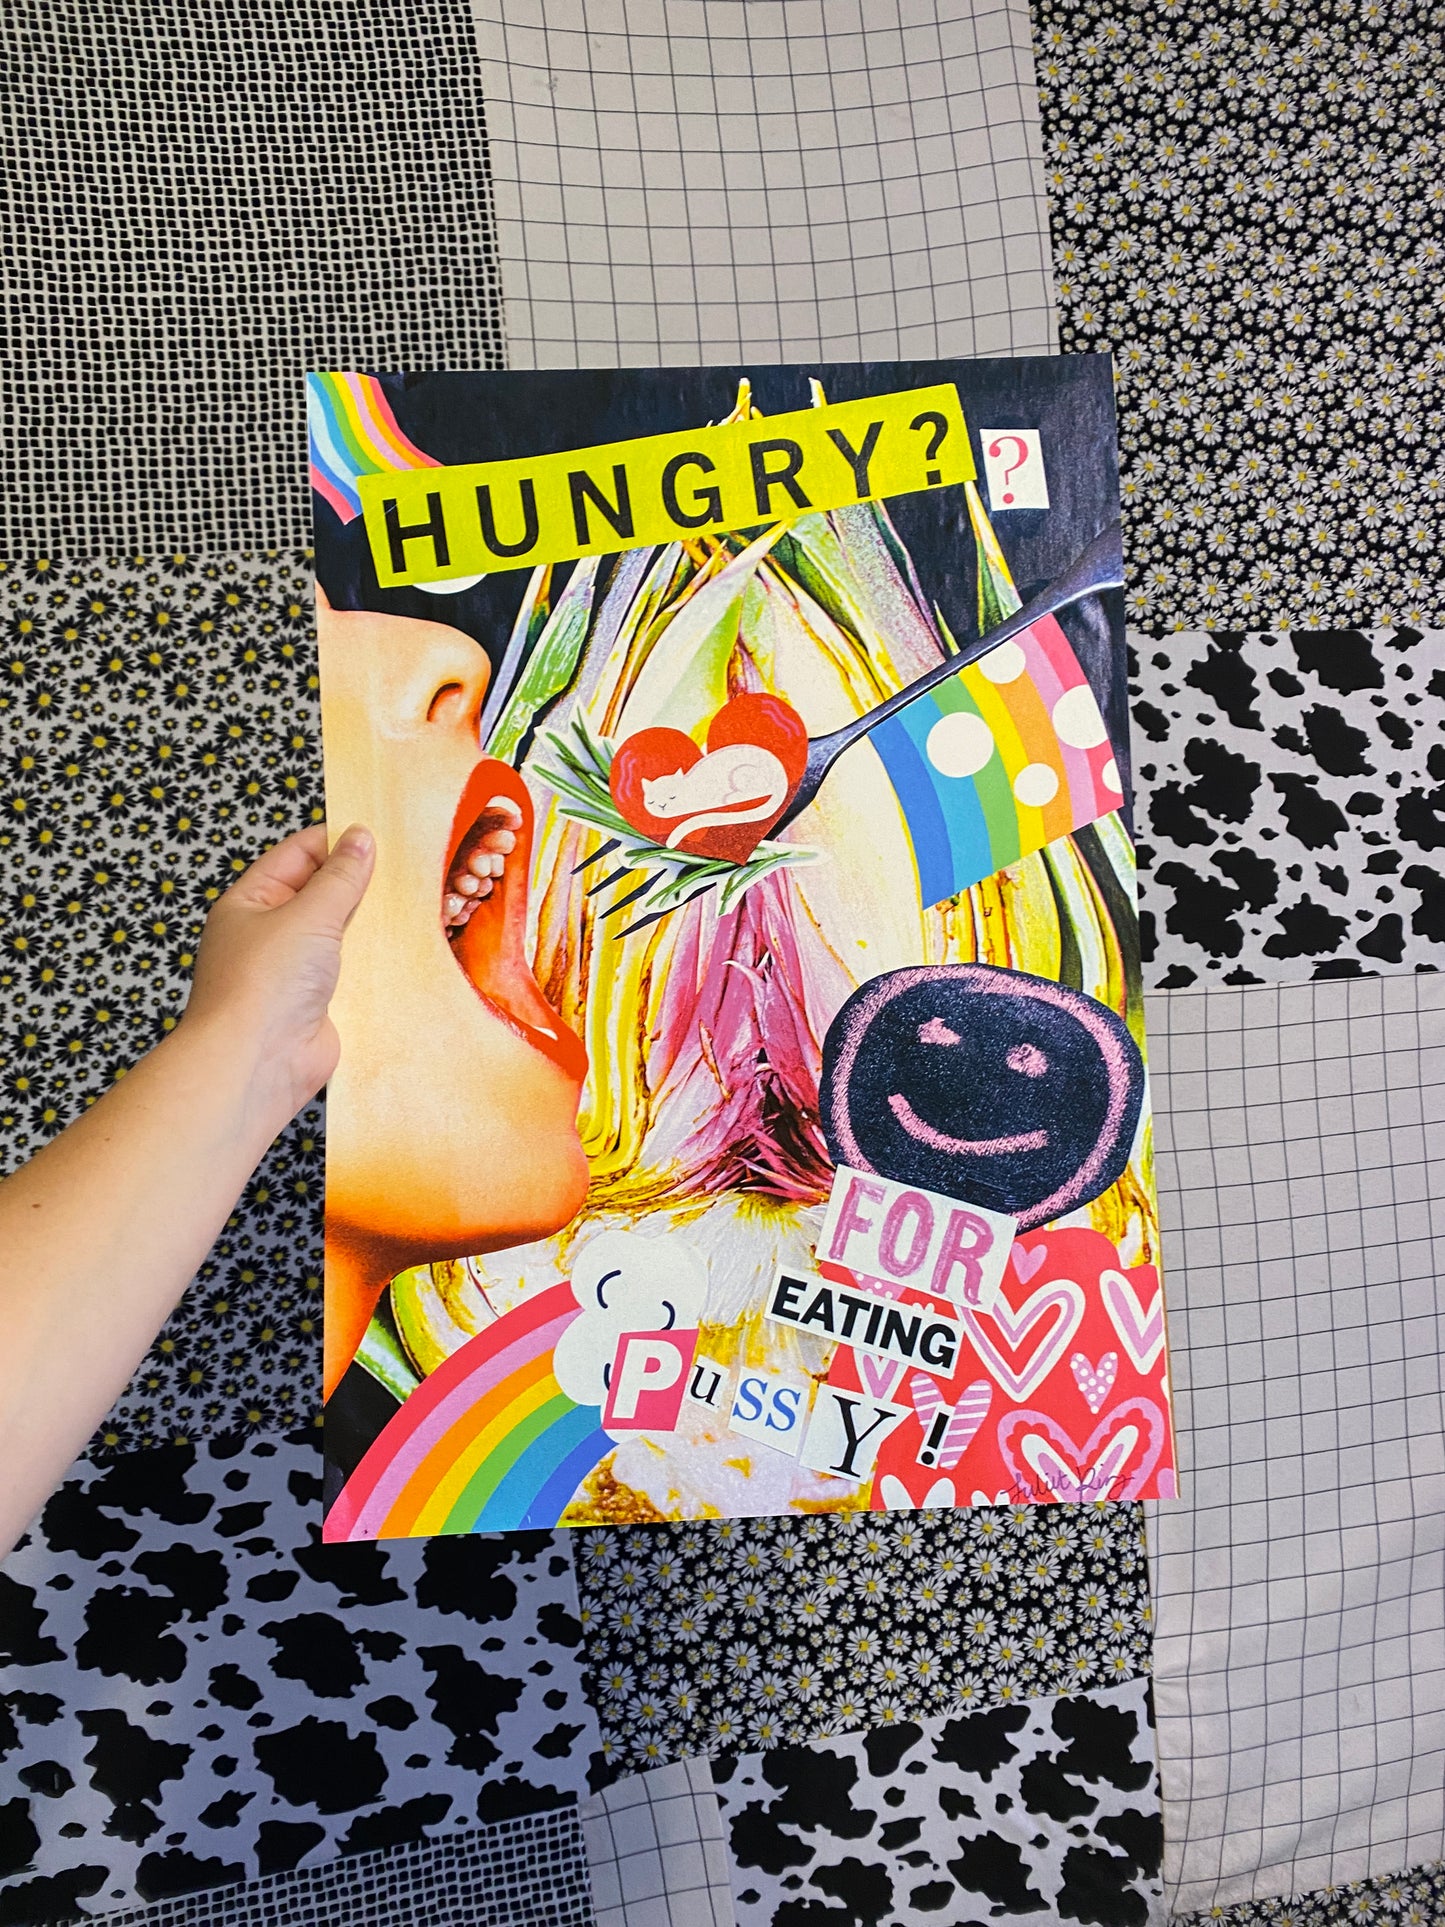 Somebody call PETA | Hungry? For Eating Pussy! Collage Digital Print | 8.5x11 in Matte Paper